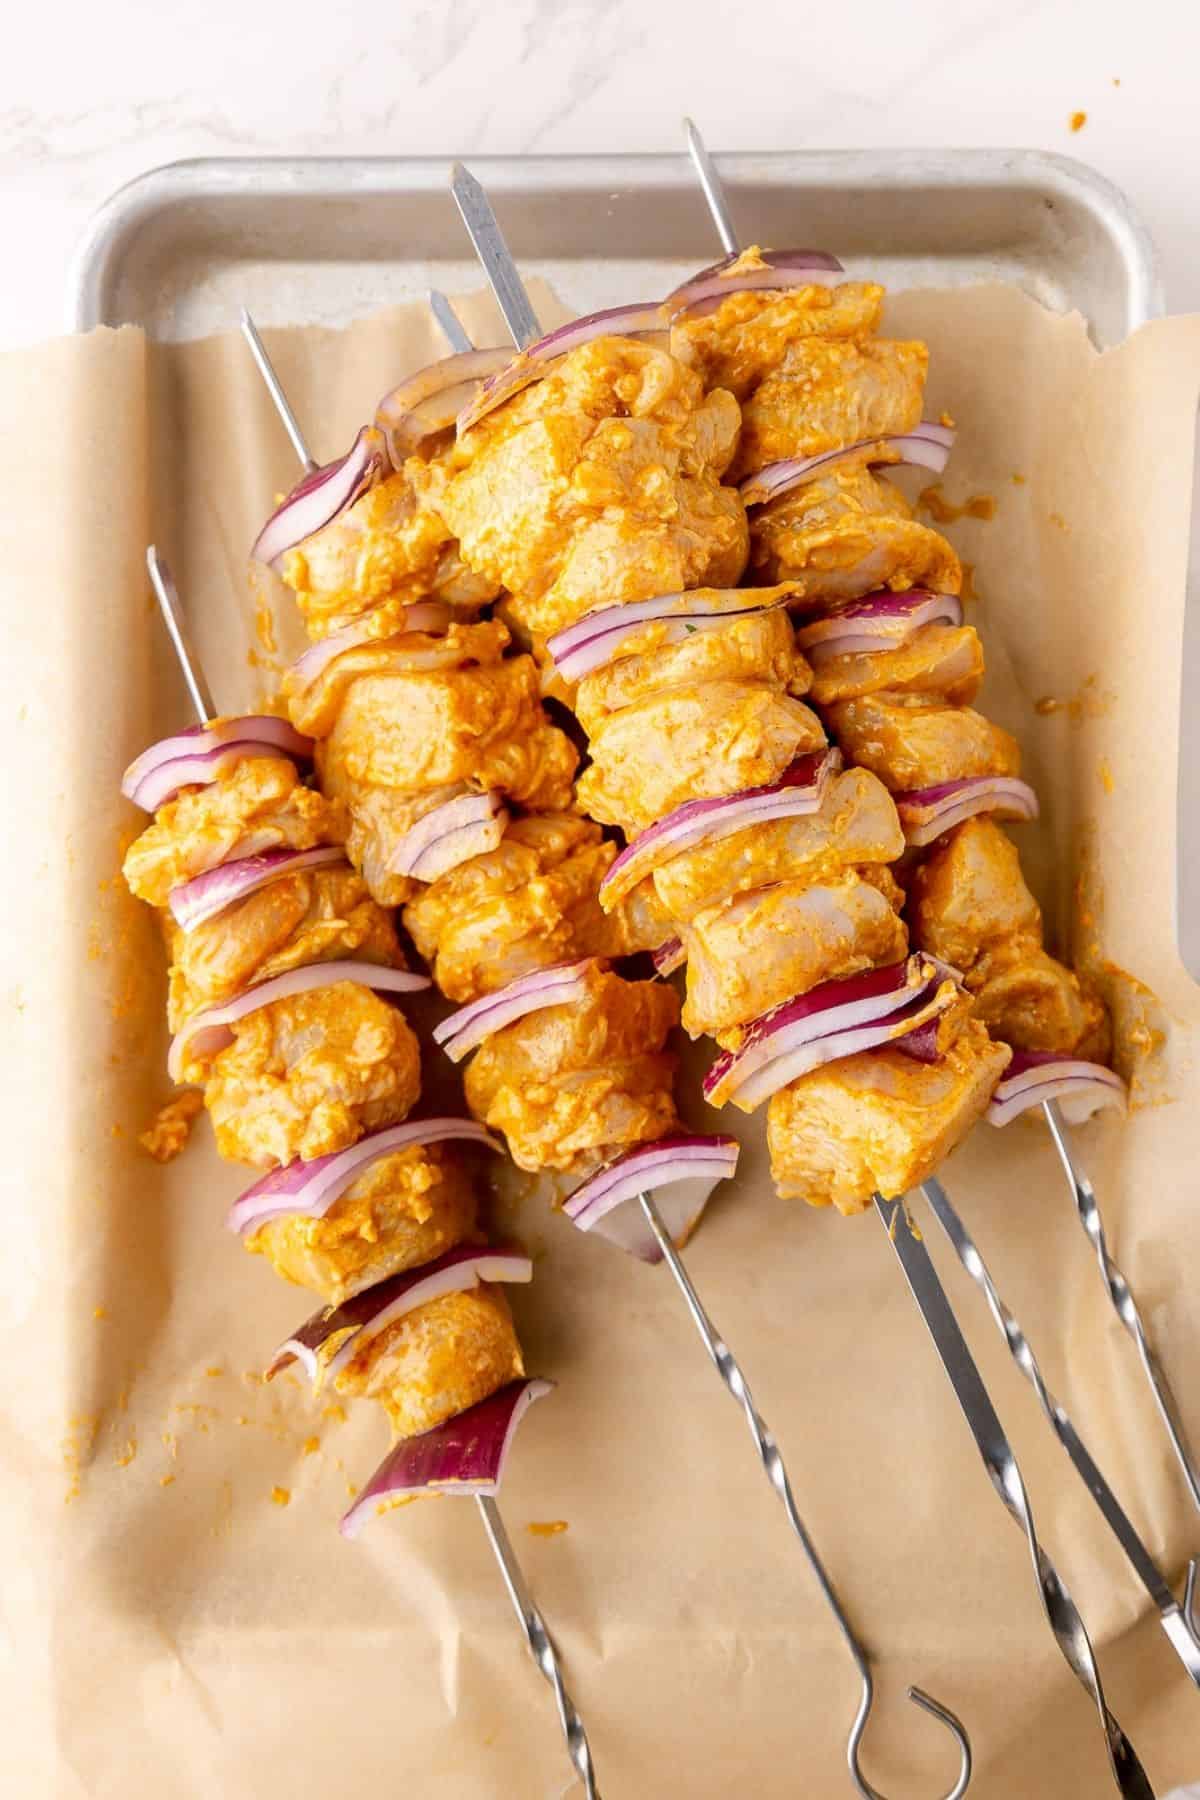 Skewered chicken with red onions, laid out on a sheet tray.